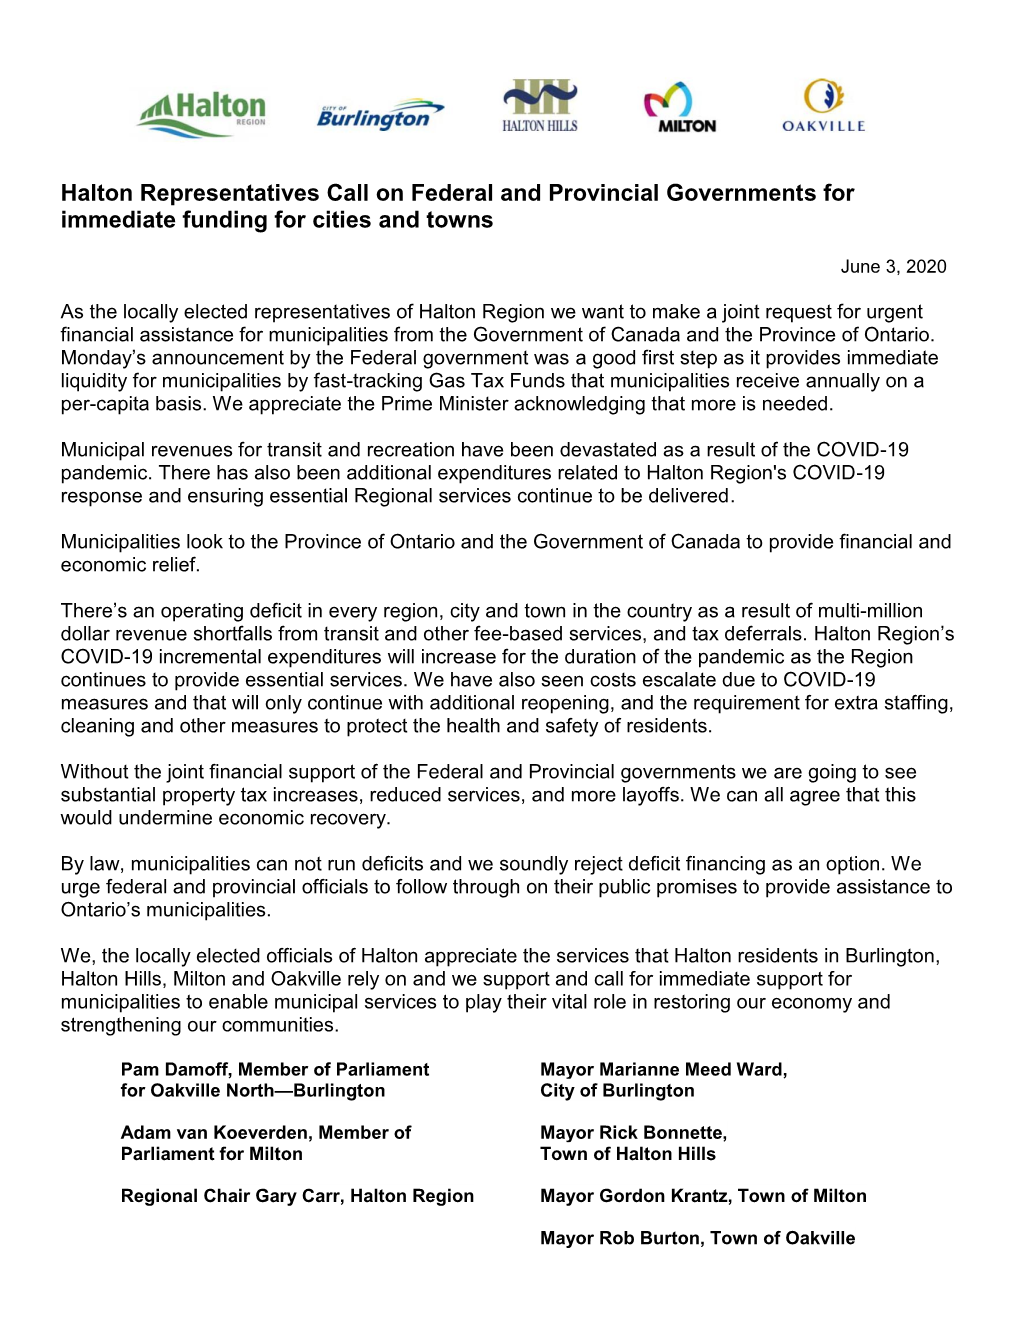 Joint Statement from Halton Region's Elected Representatives